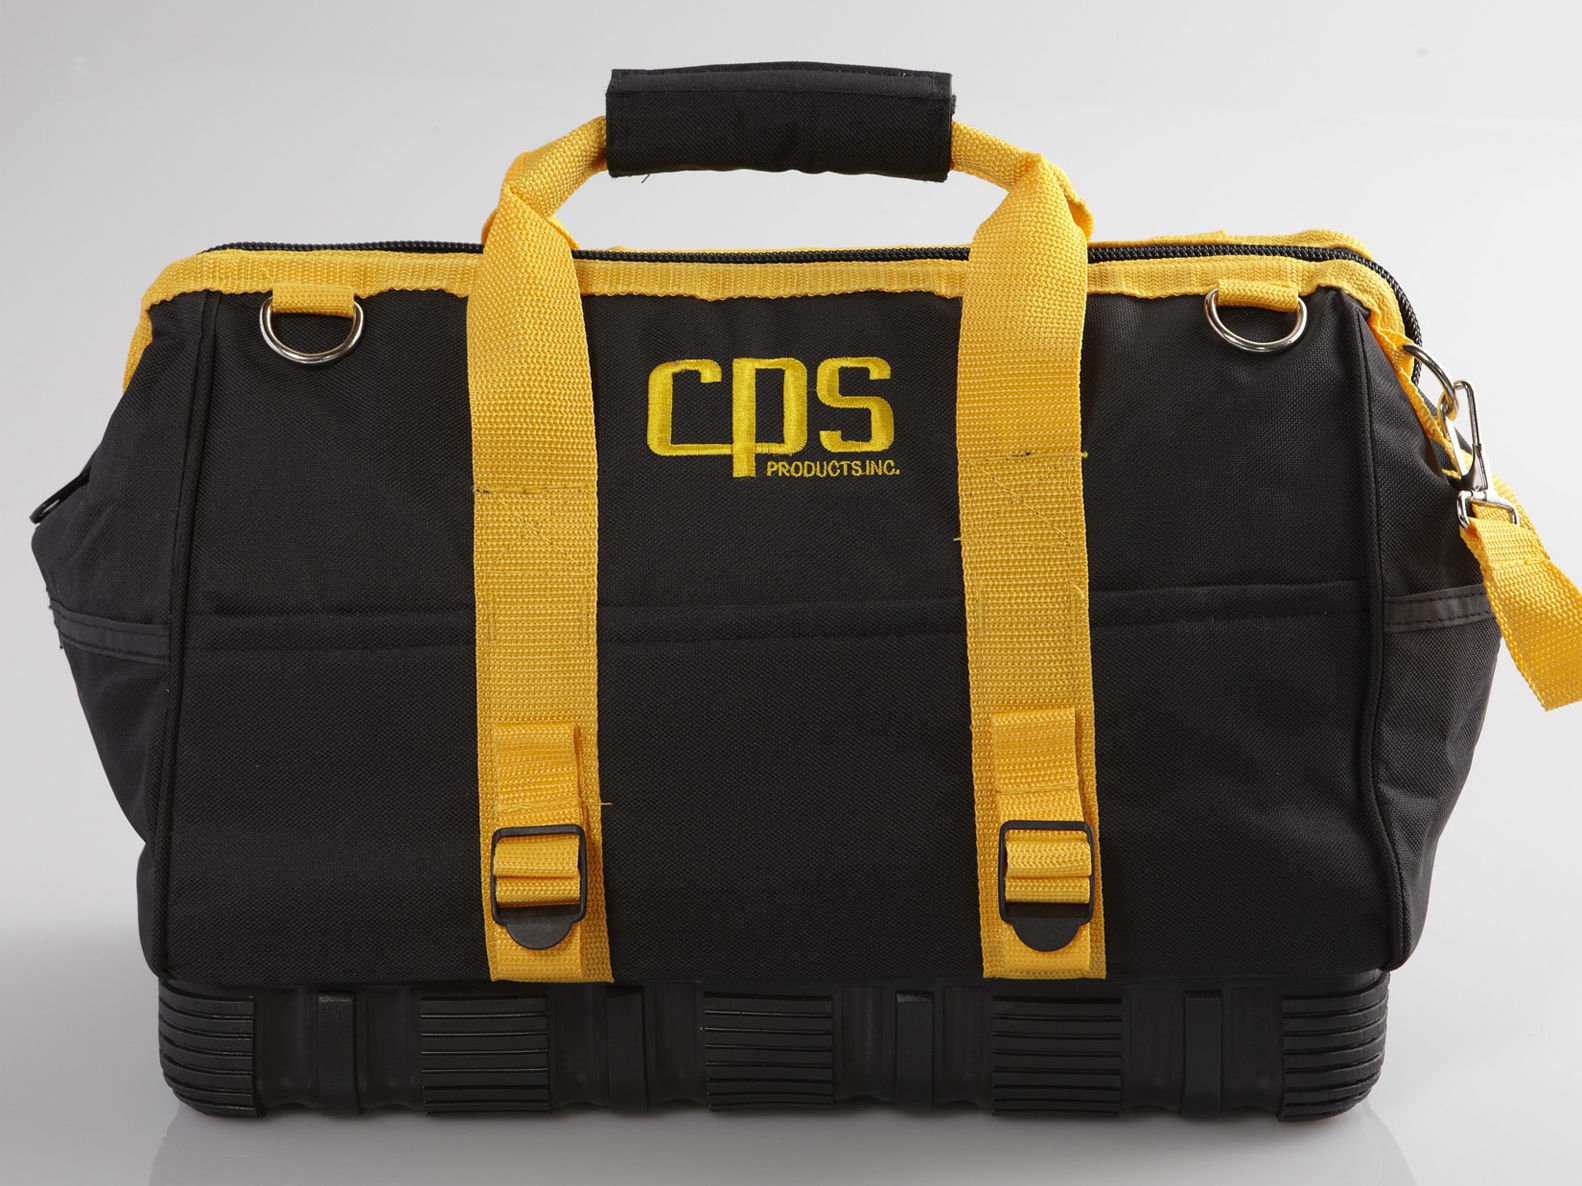 LARGE BAG WITH OPEN MOUTH AND RUBBER BOTTOM TLBAG2 CPS